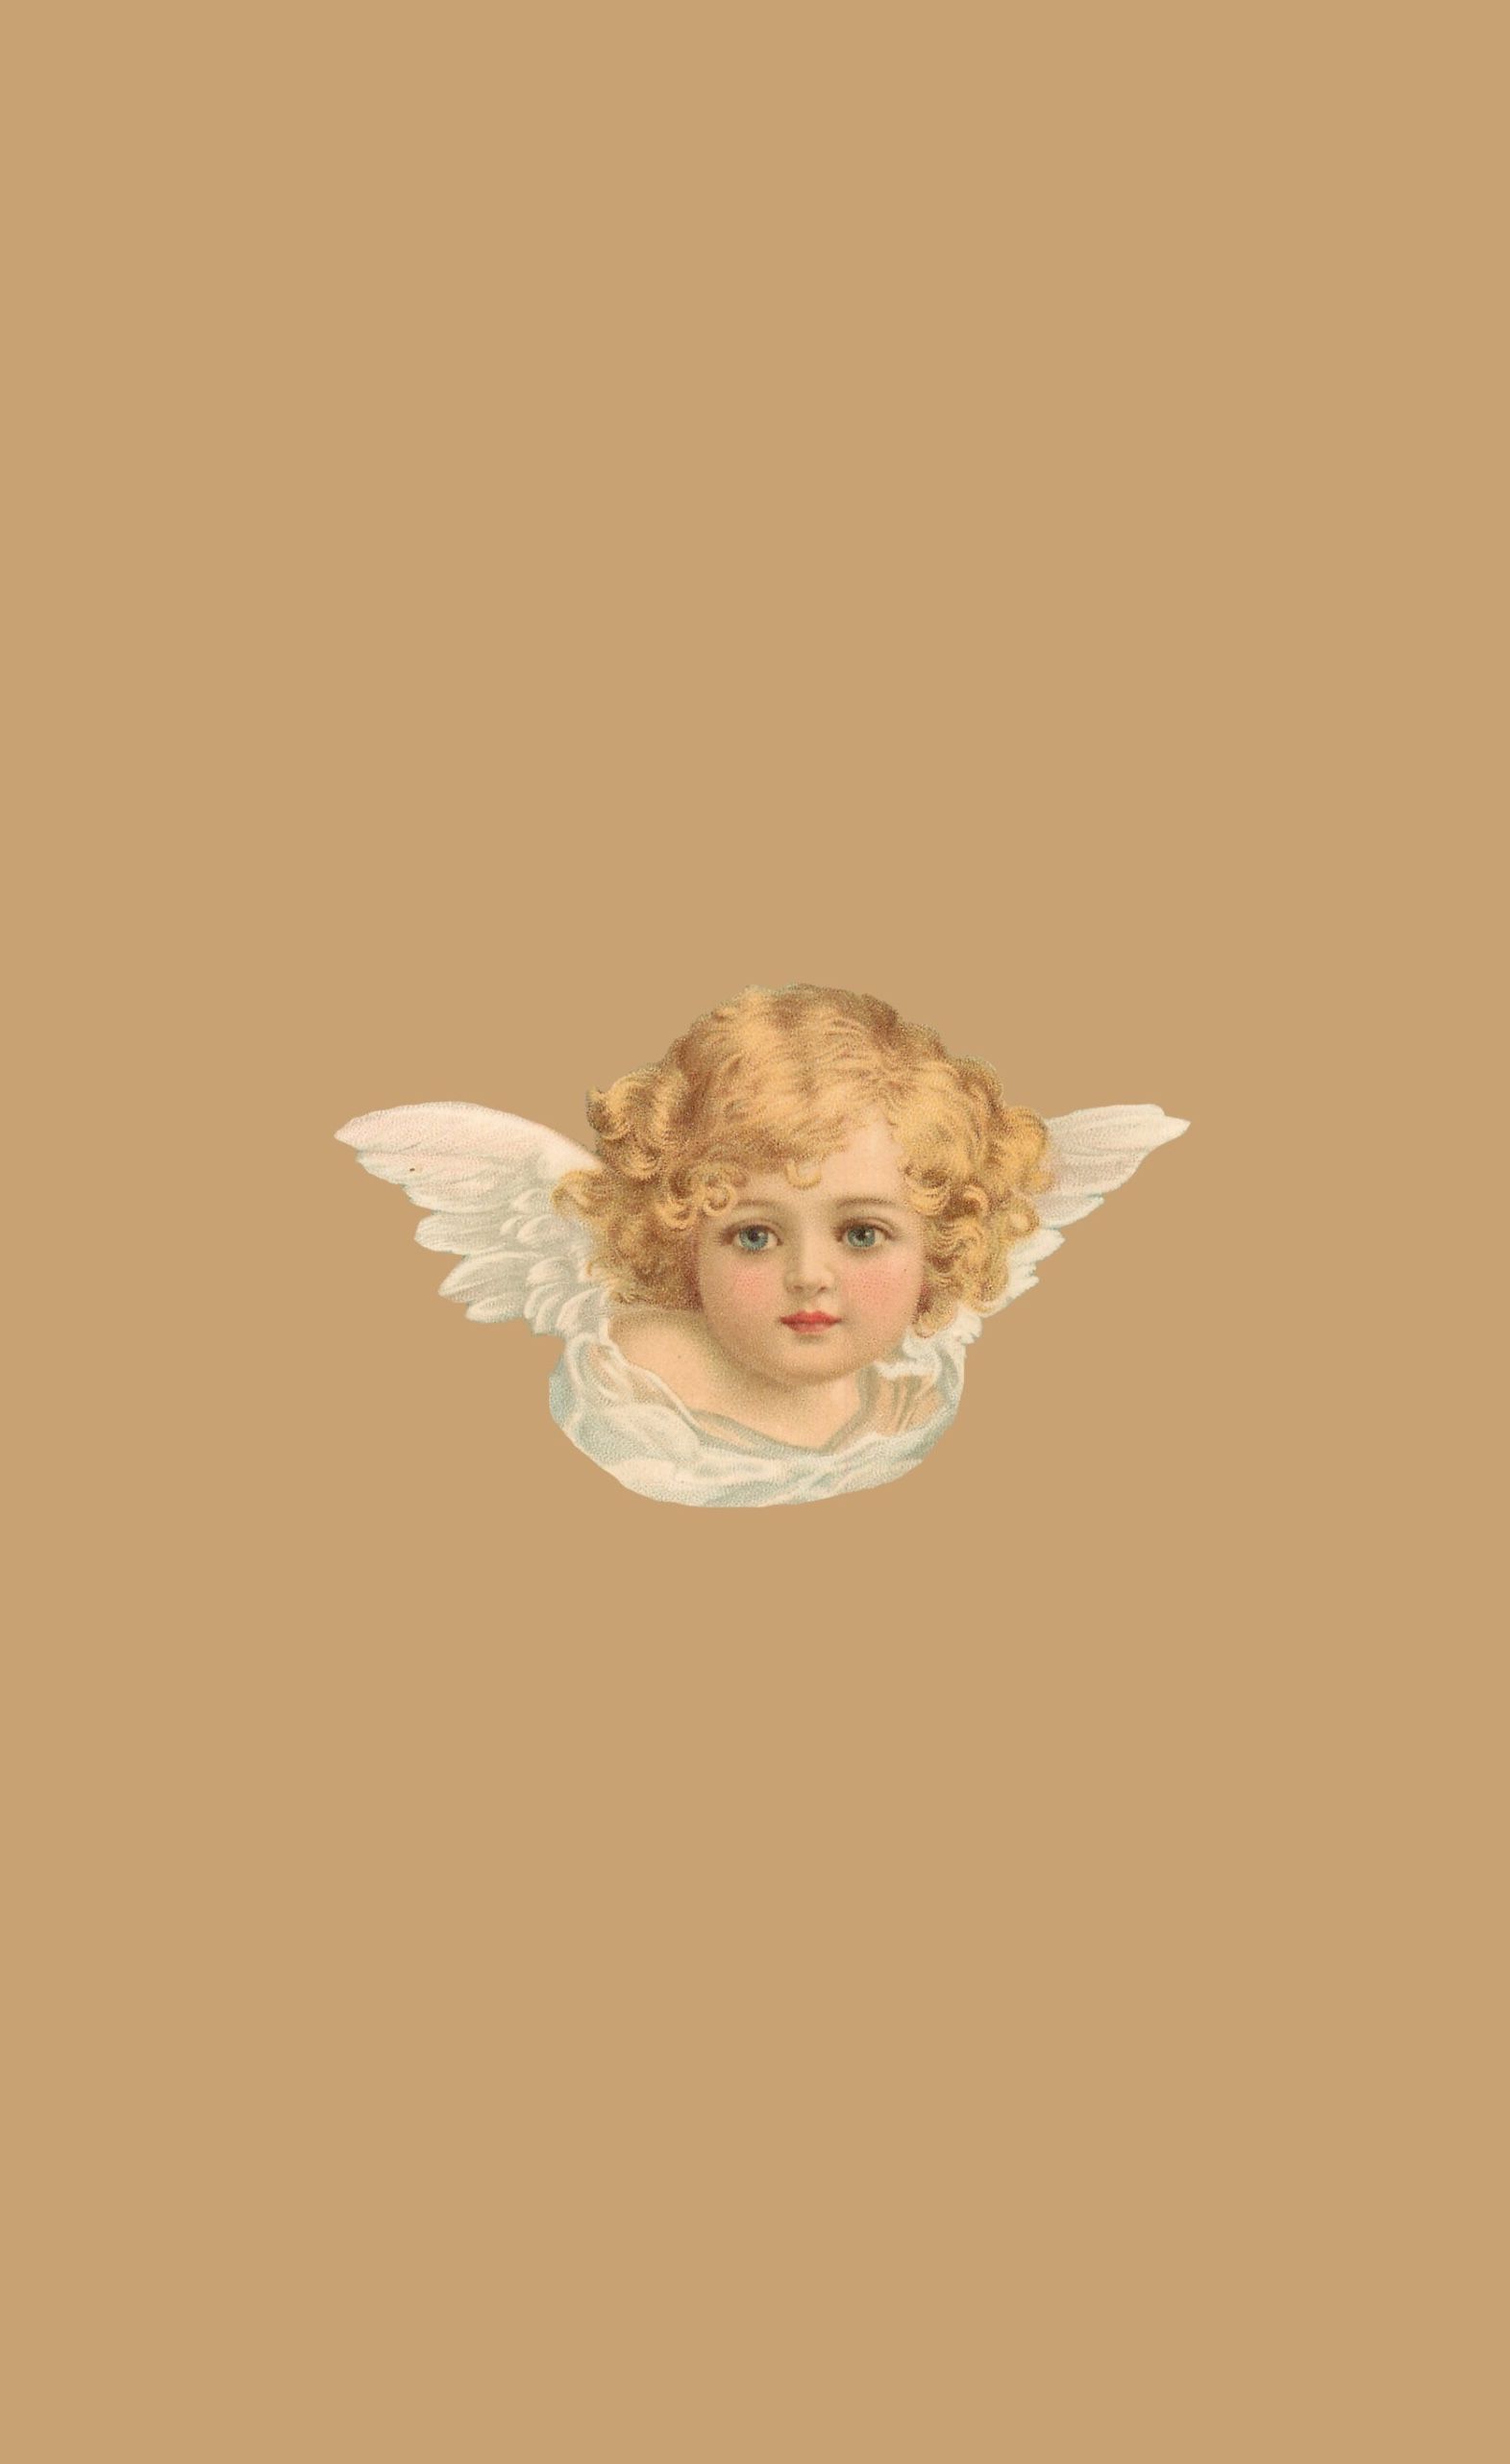 Angel Aesthetic Wallpapers - Wallpaper Cave